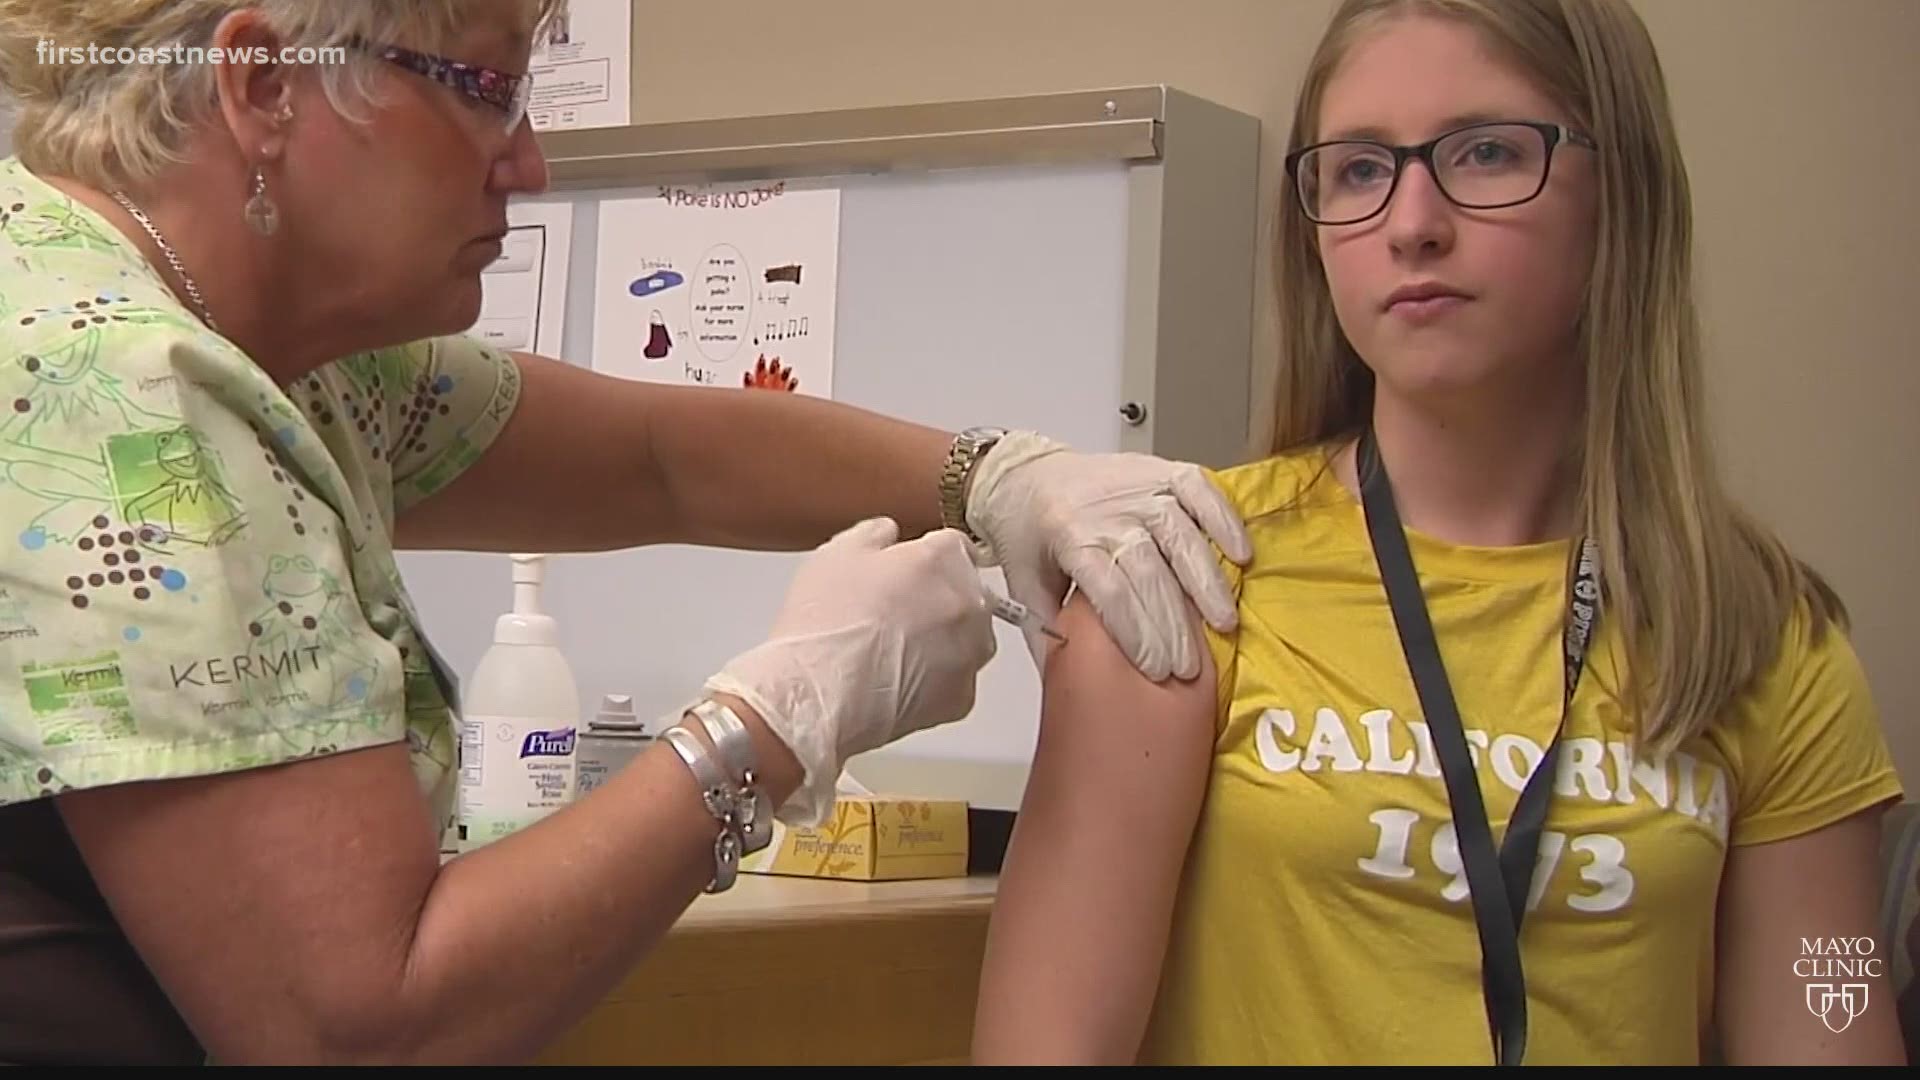 Trial underway on COVID-19 vaccines for kids